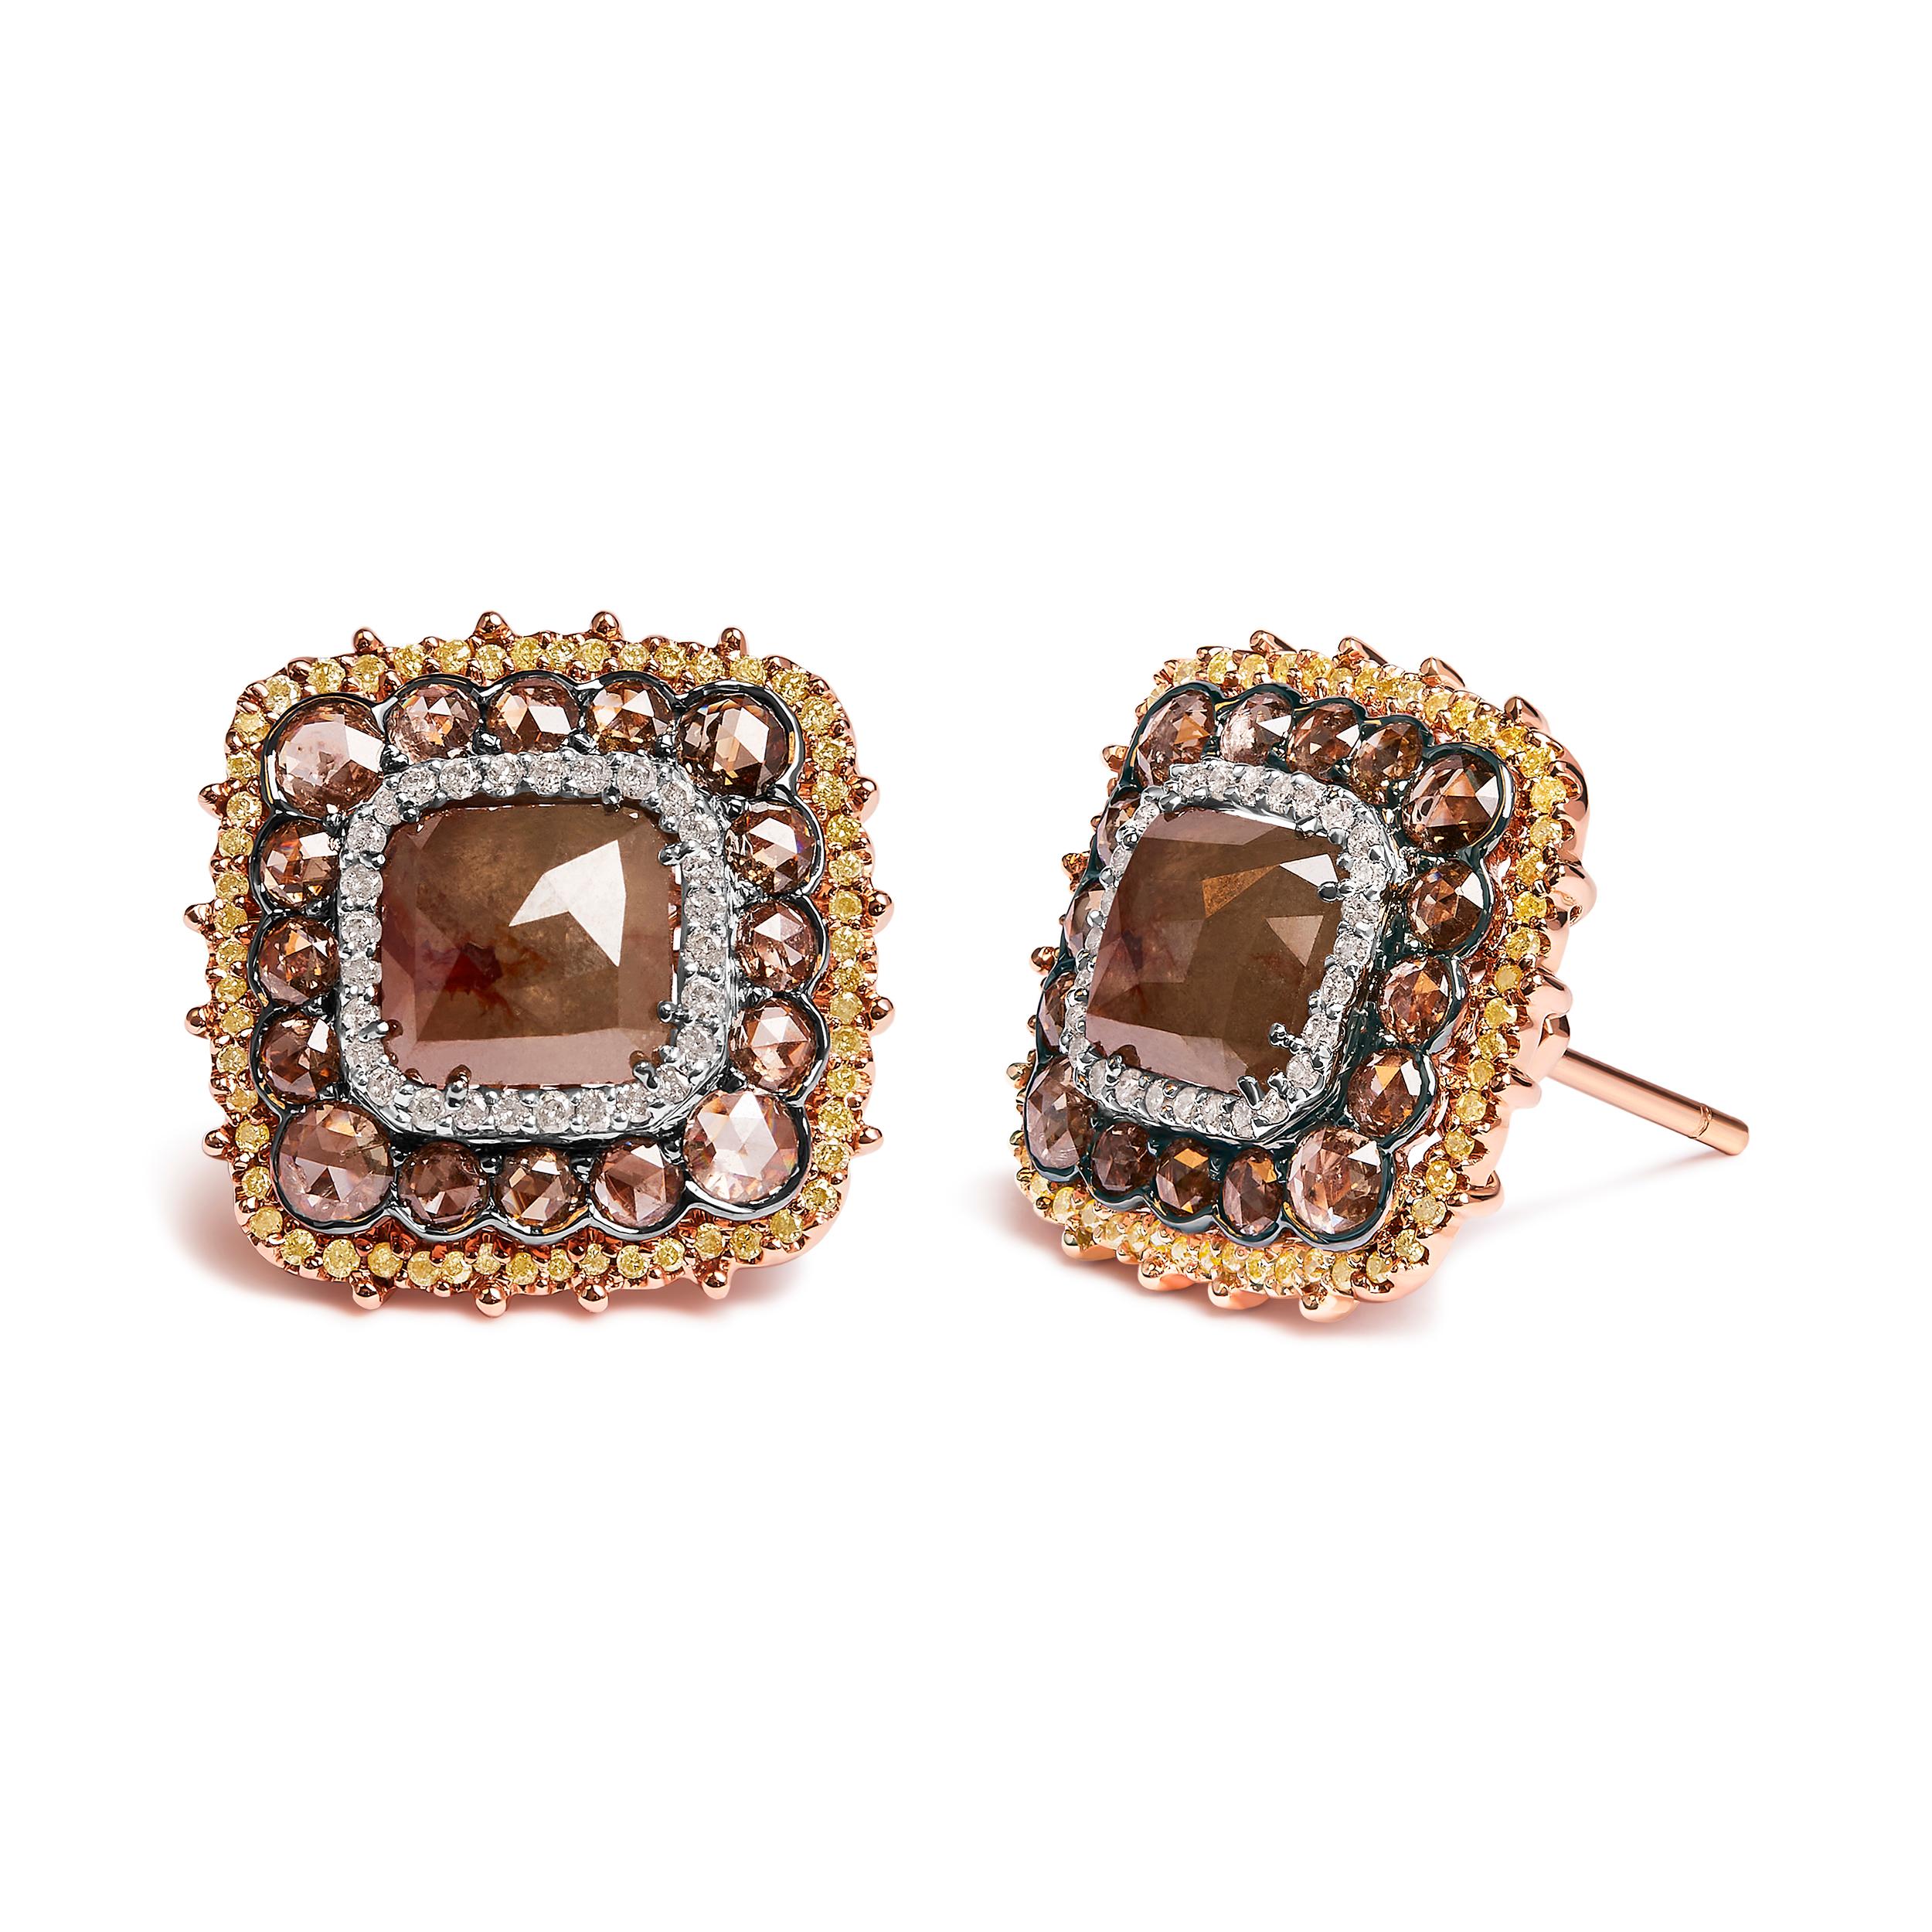 Introducing a mesmerizing masterpiece that will leave you breathless! Behold these 14K Rose Gold Square Stud Earrings, adorned with a dazzling array of 202 natural diamonds. With a total weight of 5 7/8 cttw, these exquisite earrings feature a